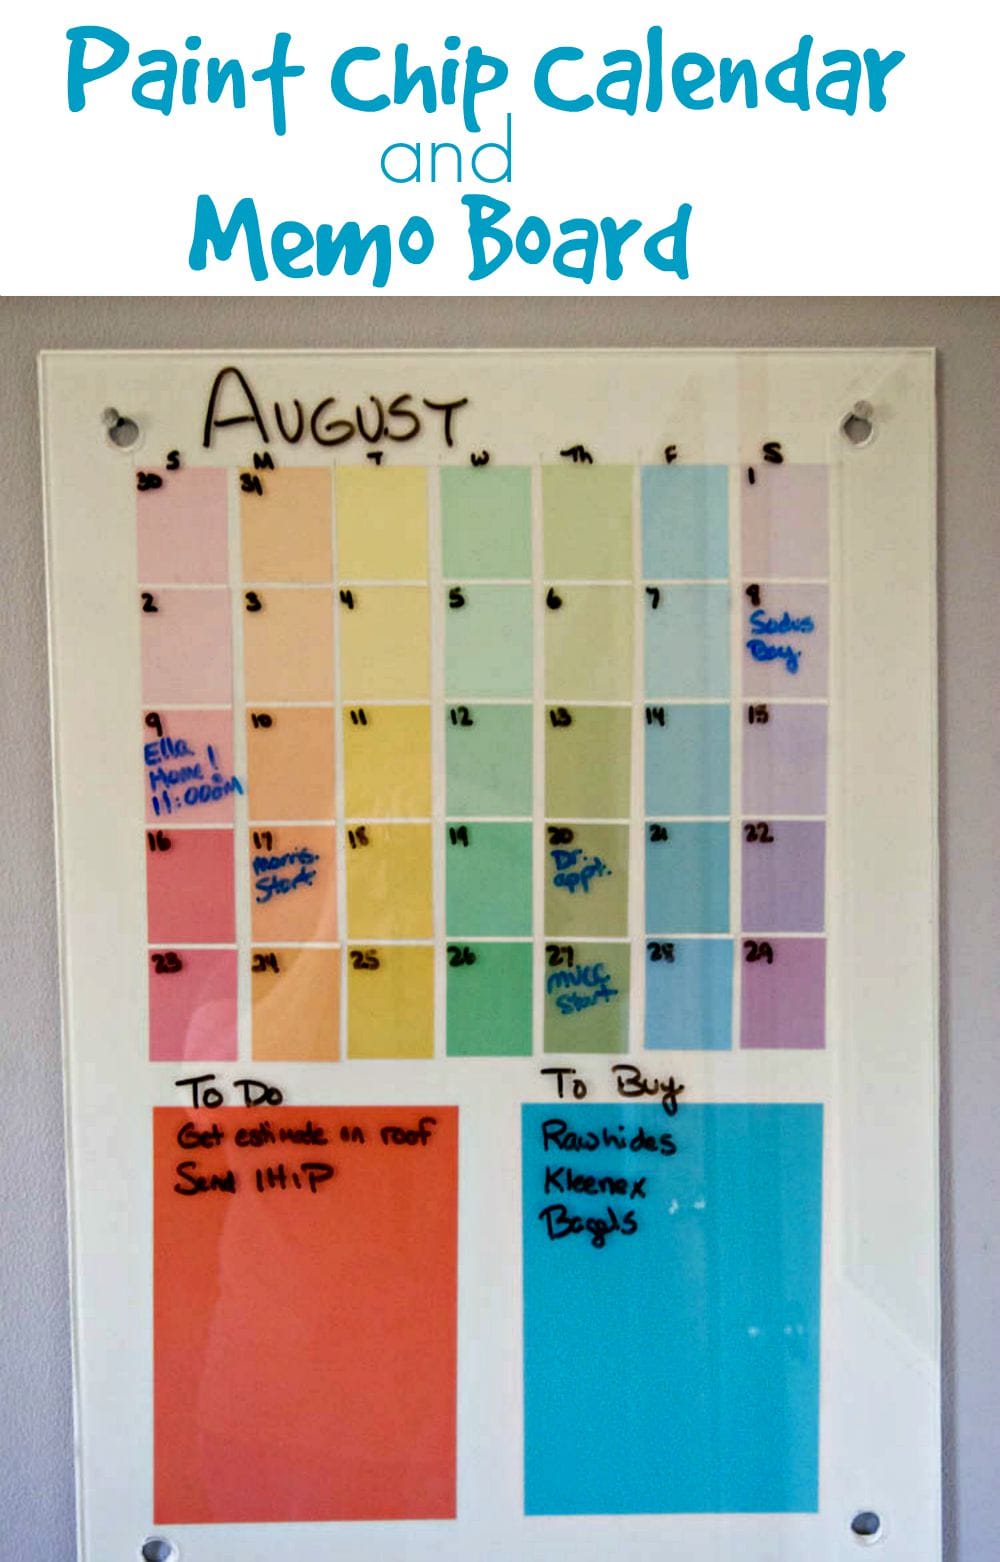 Easy Paint Chip Calendar and Memo Board DIY Project for getting organized for back to school